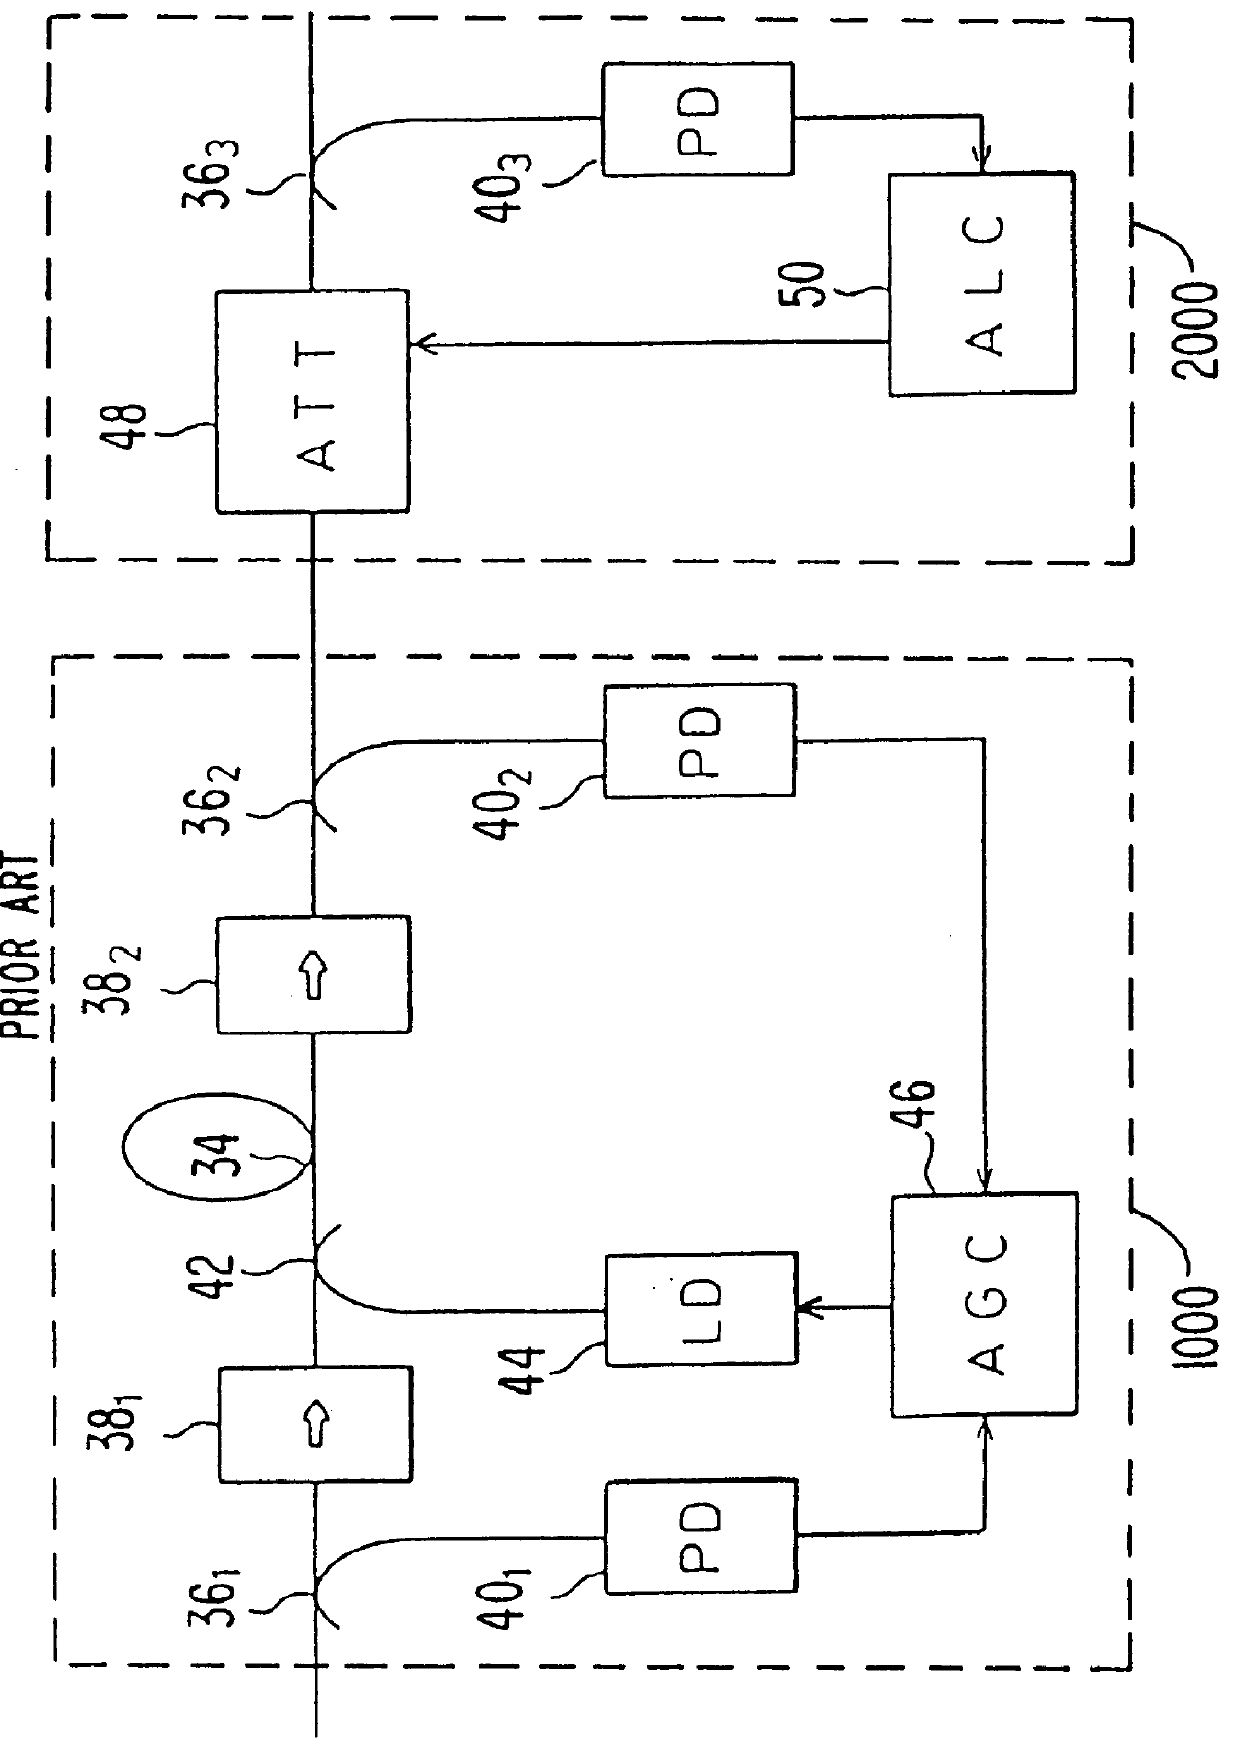 Controller which controls a variable optical attenuator to control the power level of a wavelength-multiplexed optical signal when the number of channels are varied